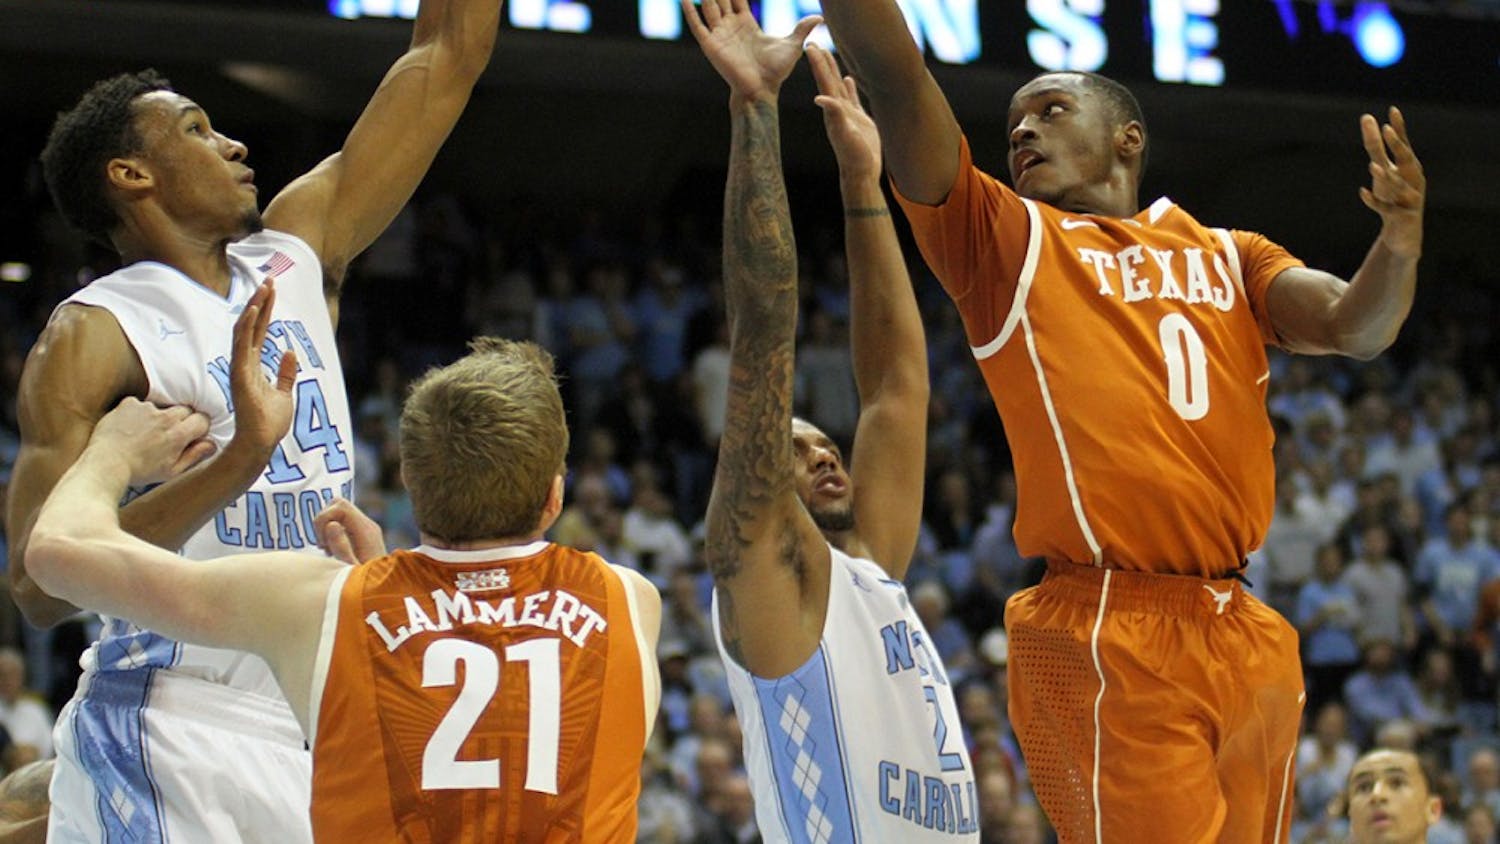 	The Texas Longhorns defeat the Tar Heels 86-83 in Chapel Hill on Wednesday night.